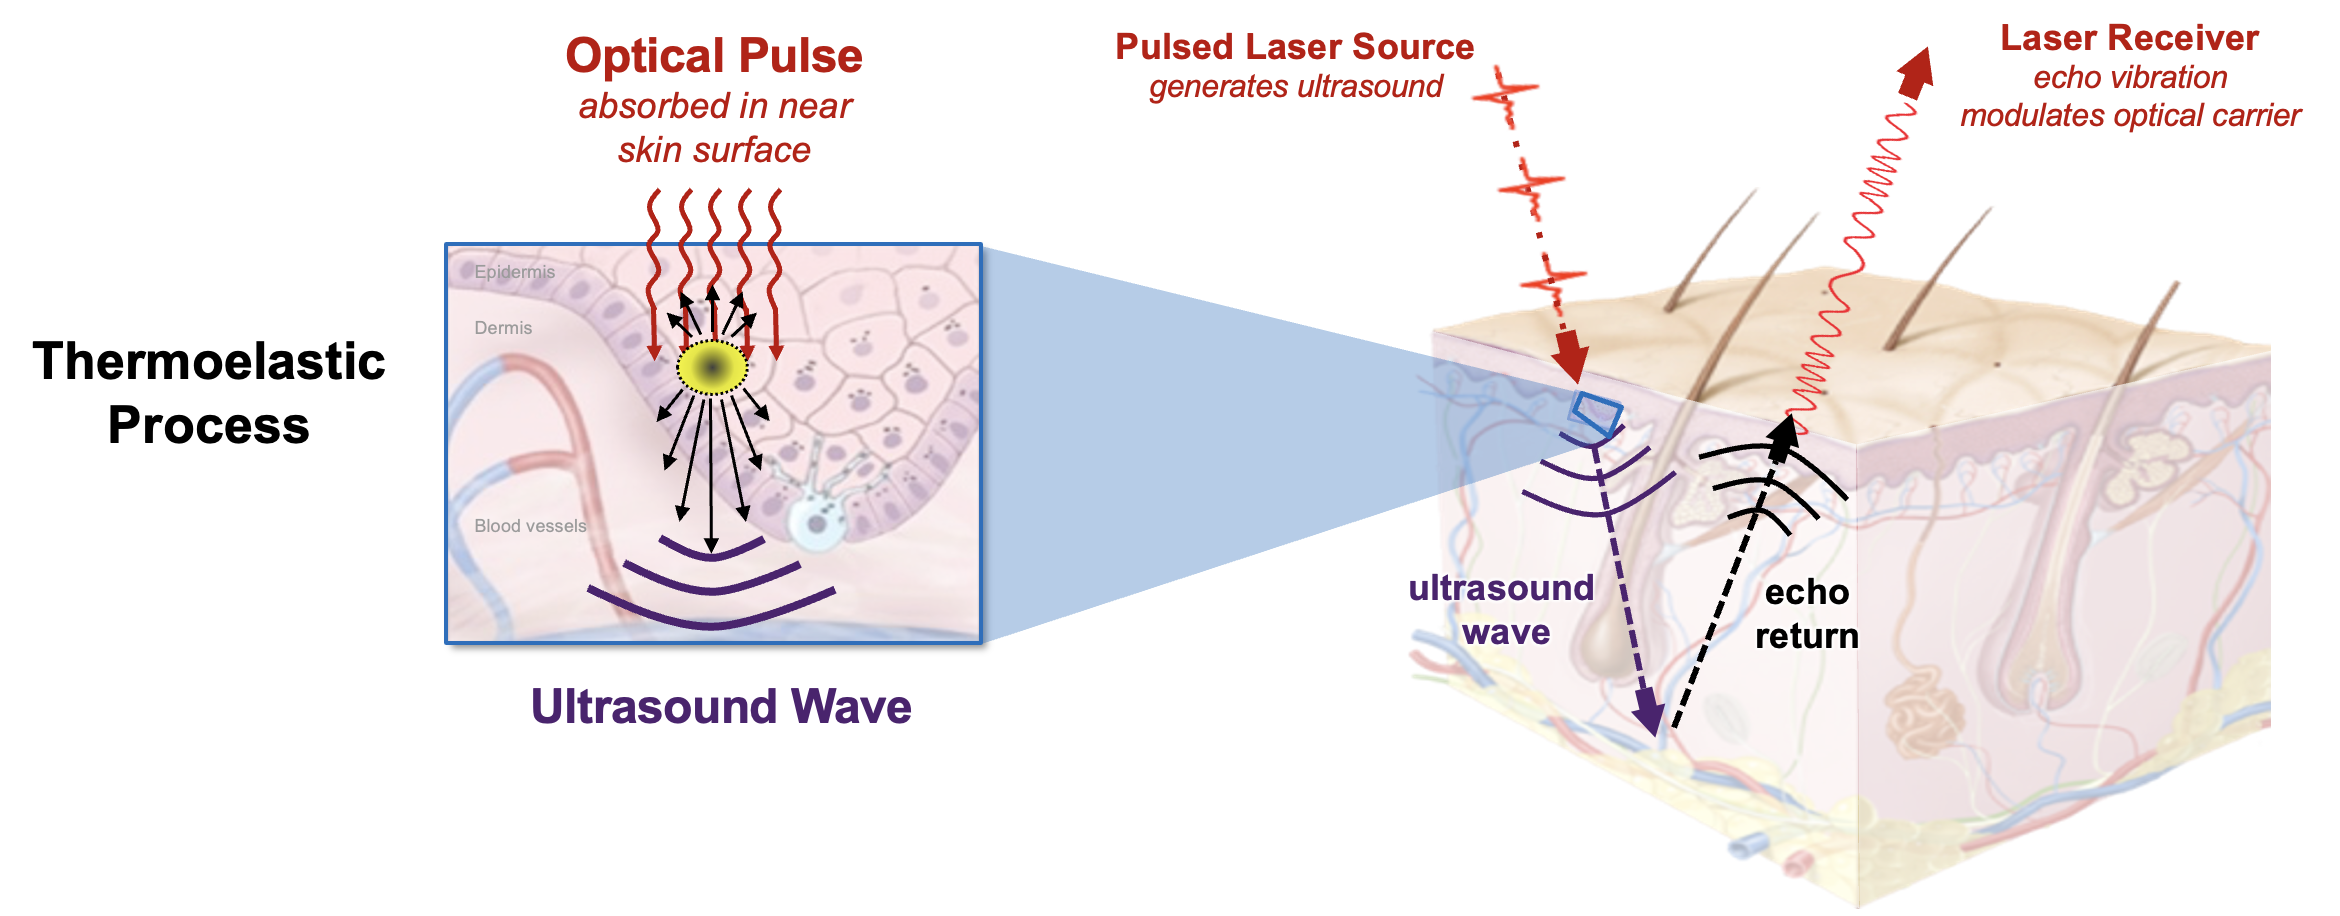 A schematic showing the thermoelastic process of optical energy absorbing near the skin surface, causing tissue to locally heat and deform and generating ultrasonic waves, which echo back to the surface.